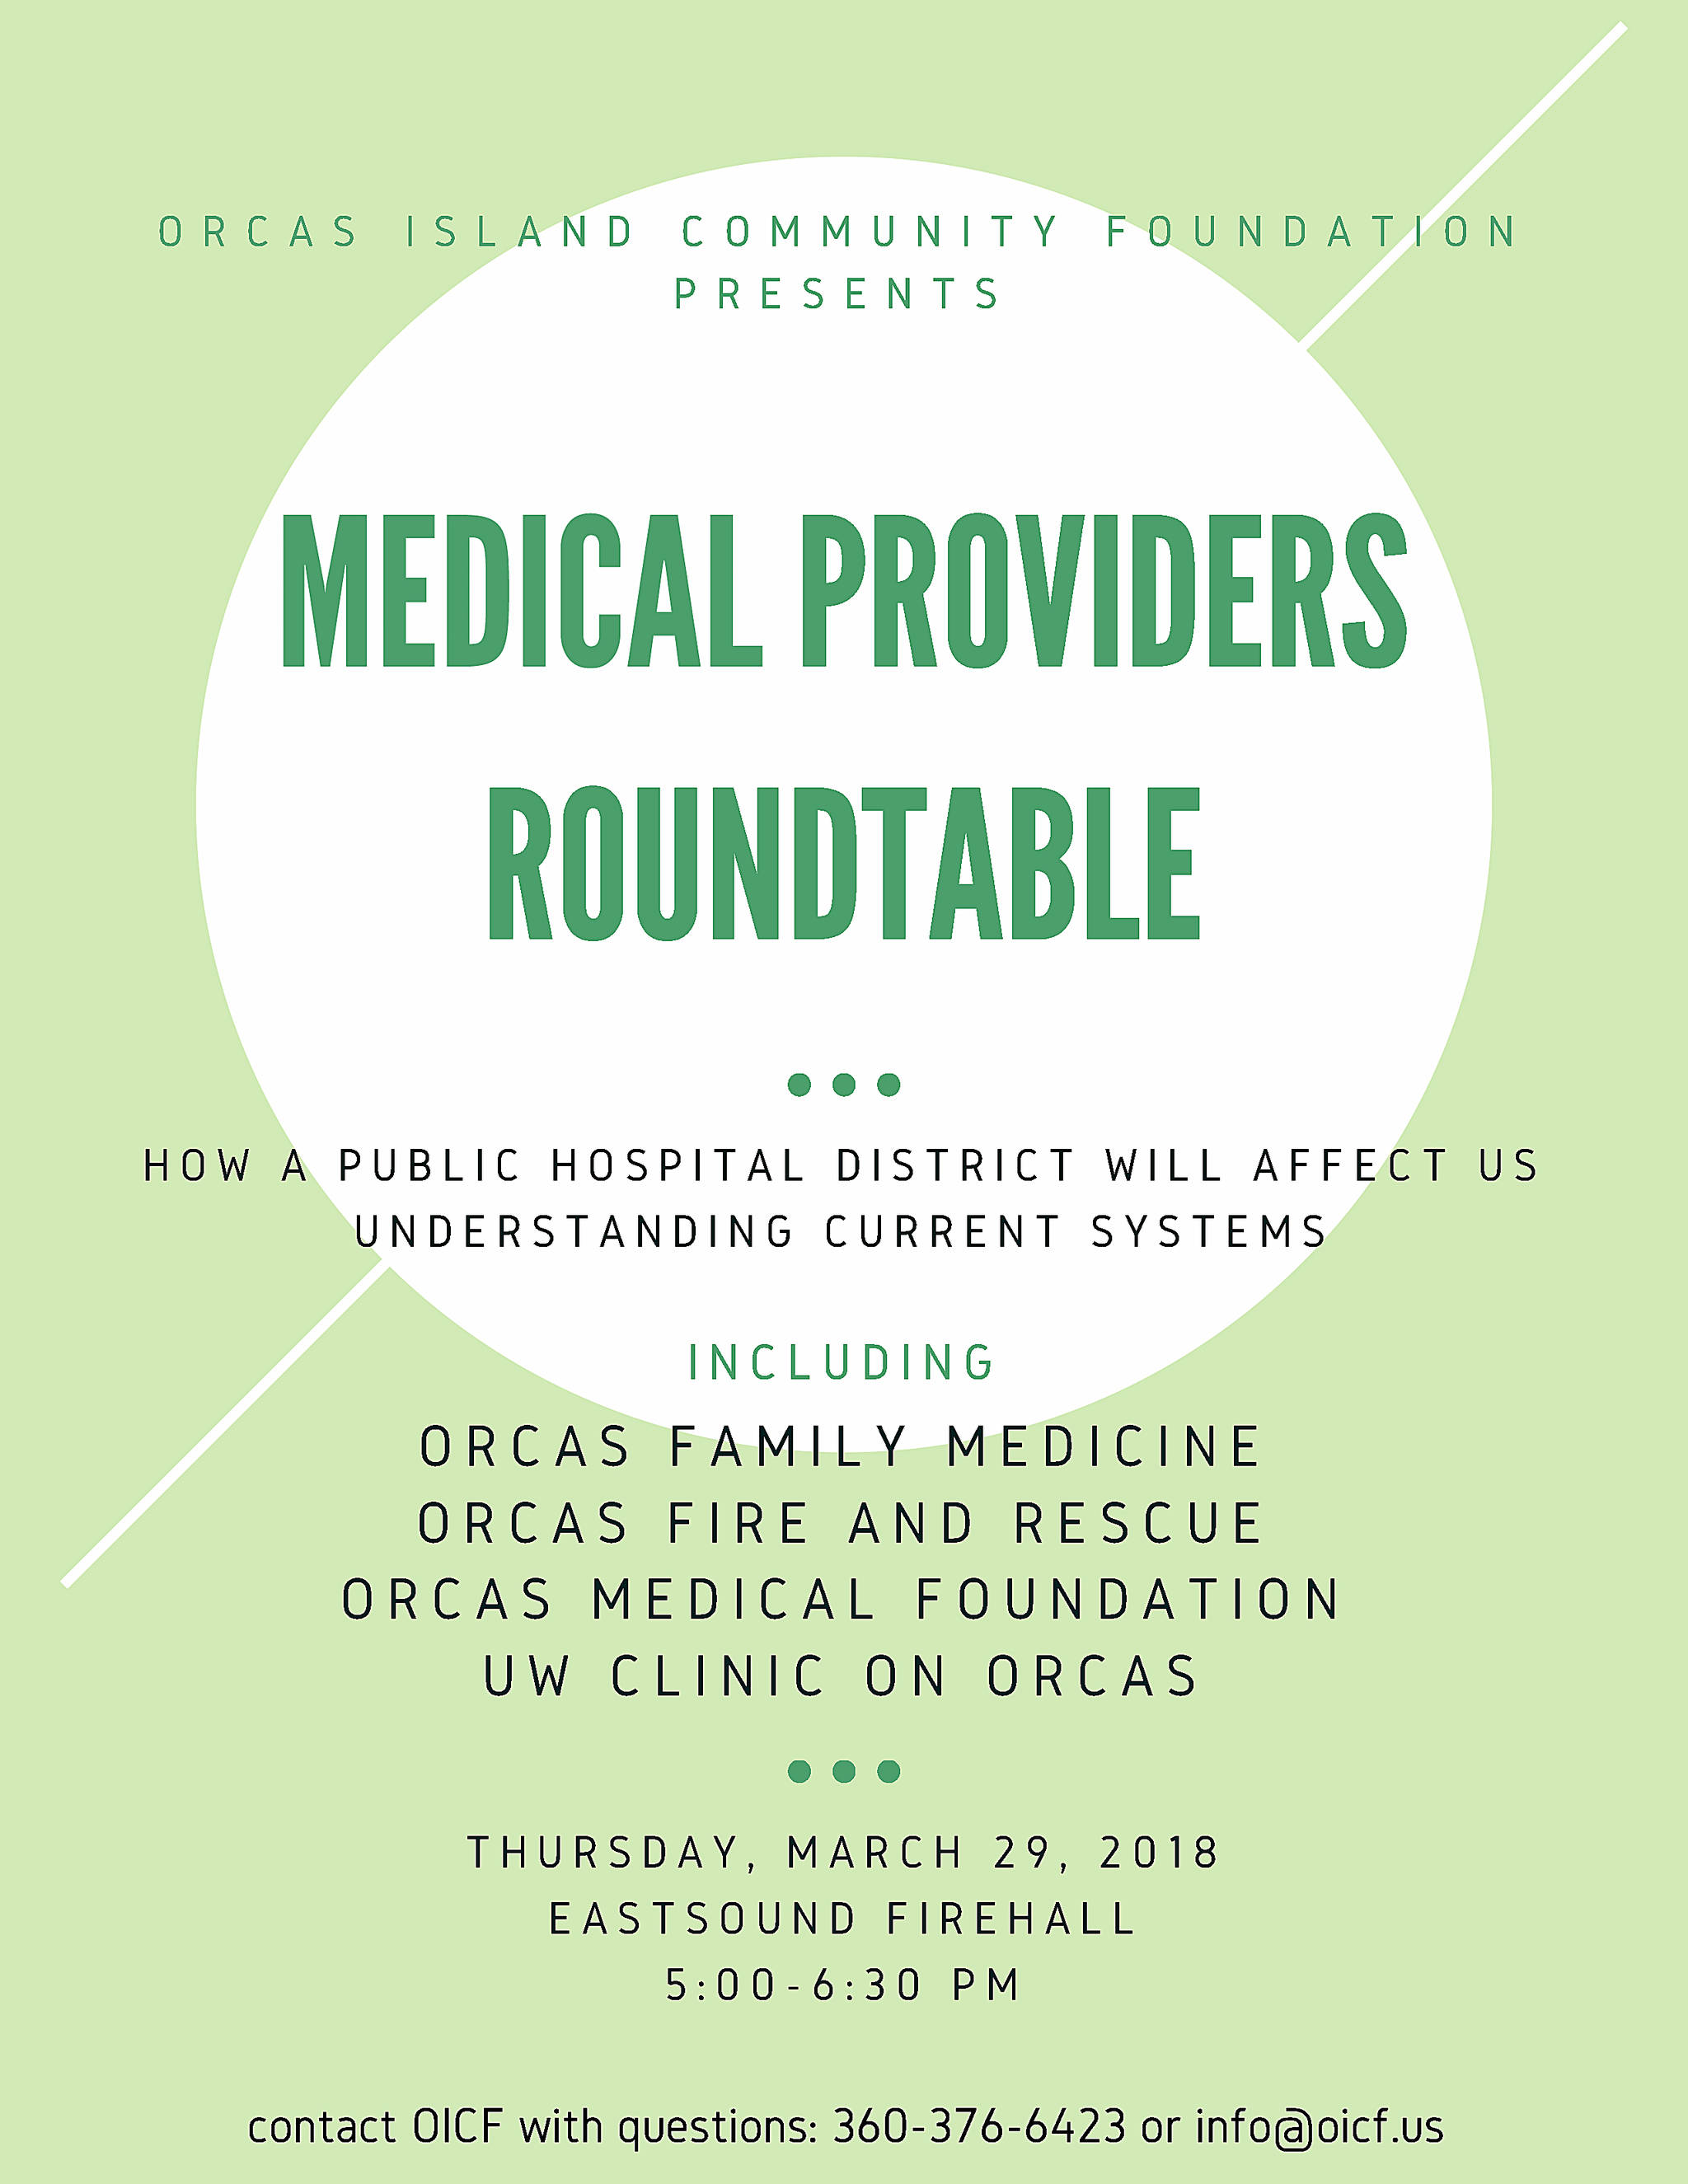 Medical roundtable with local providers